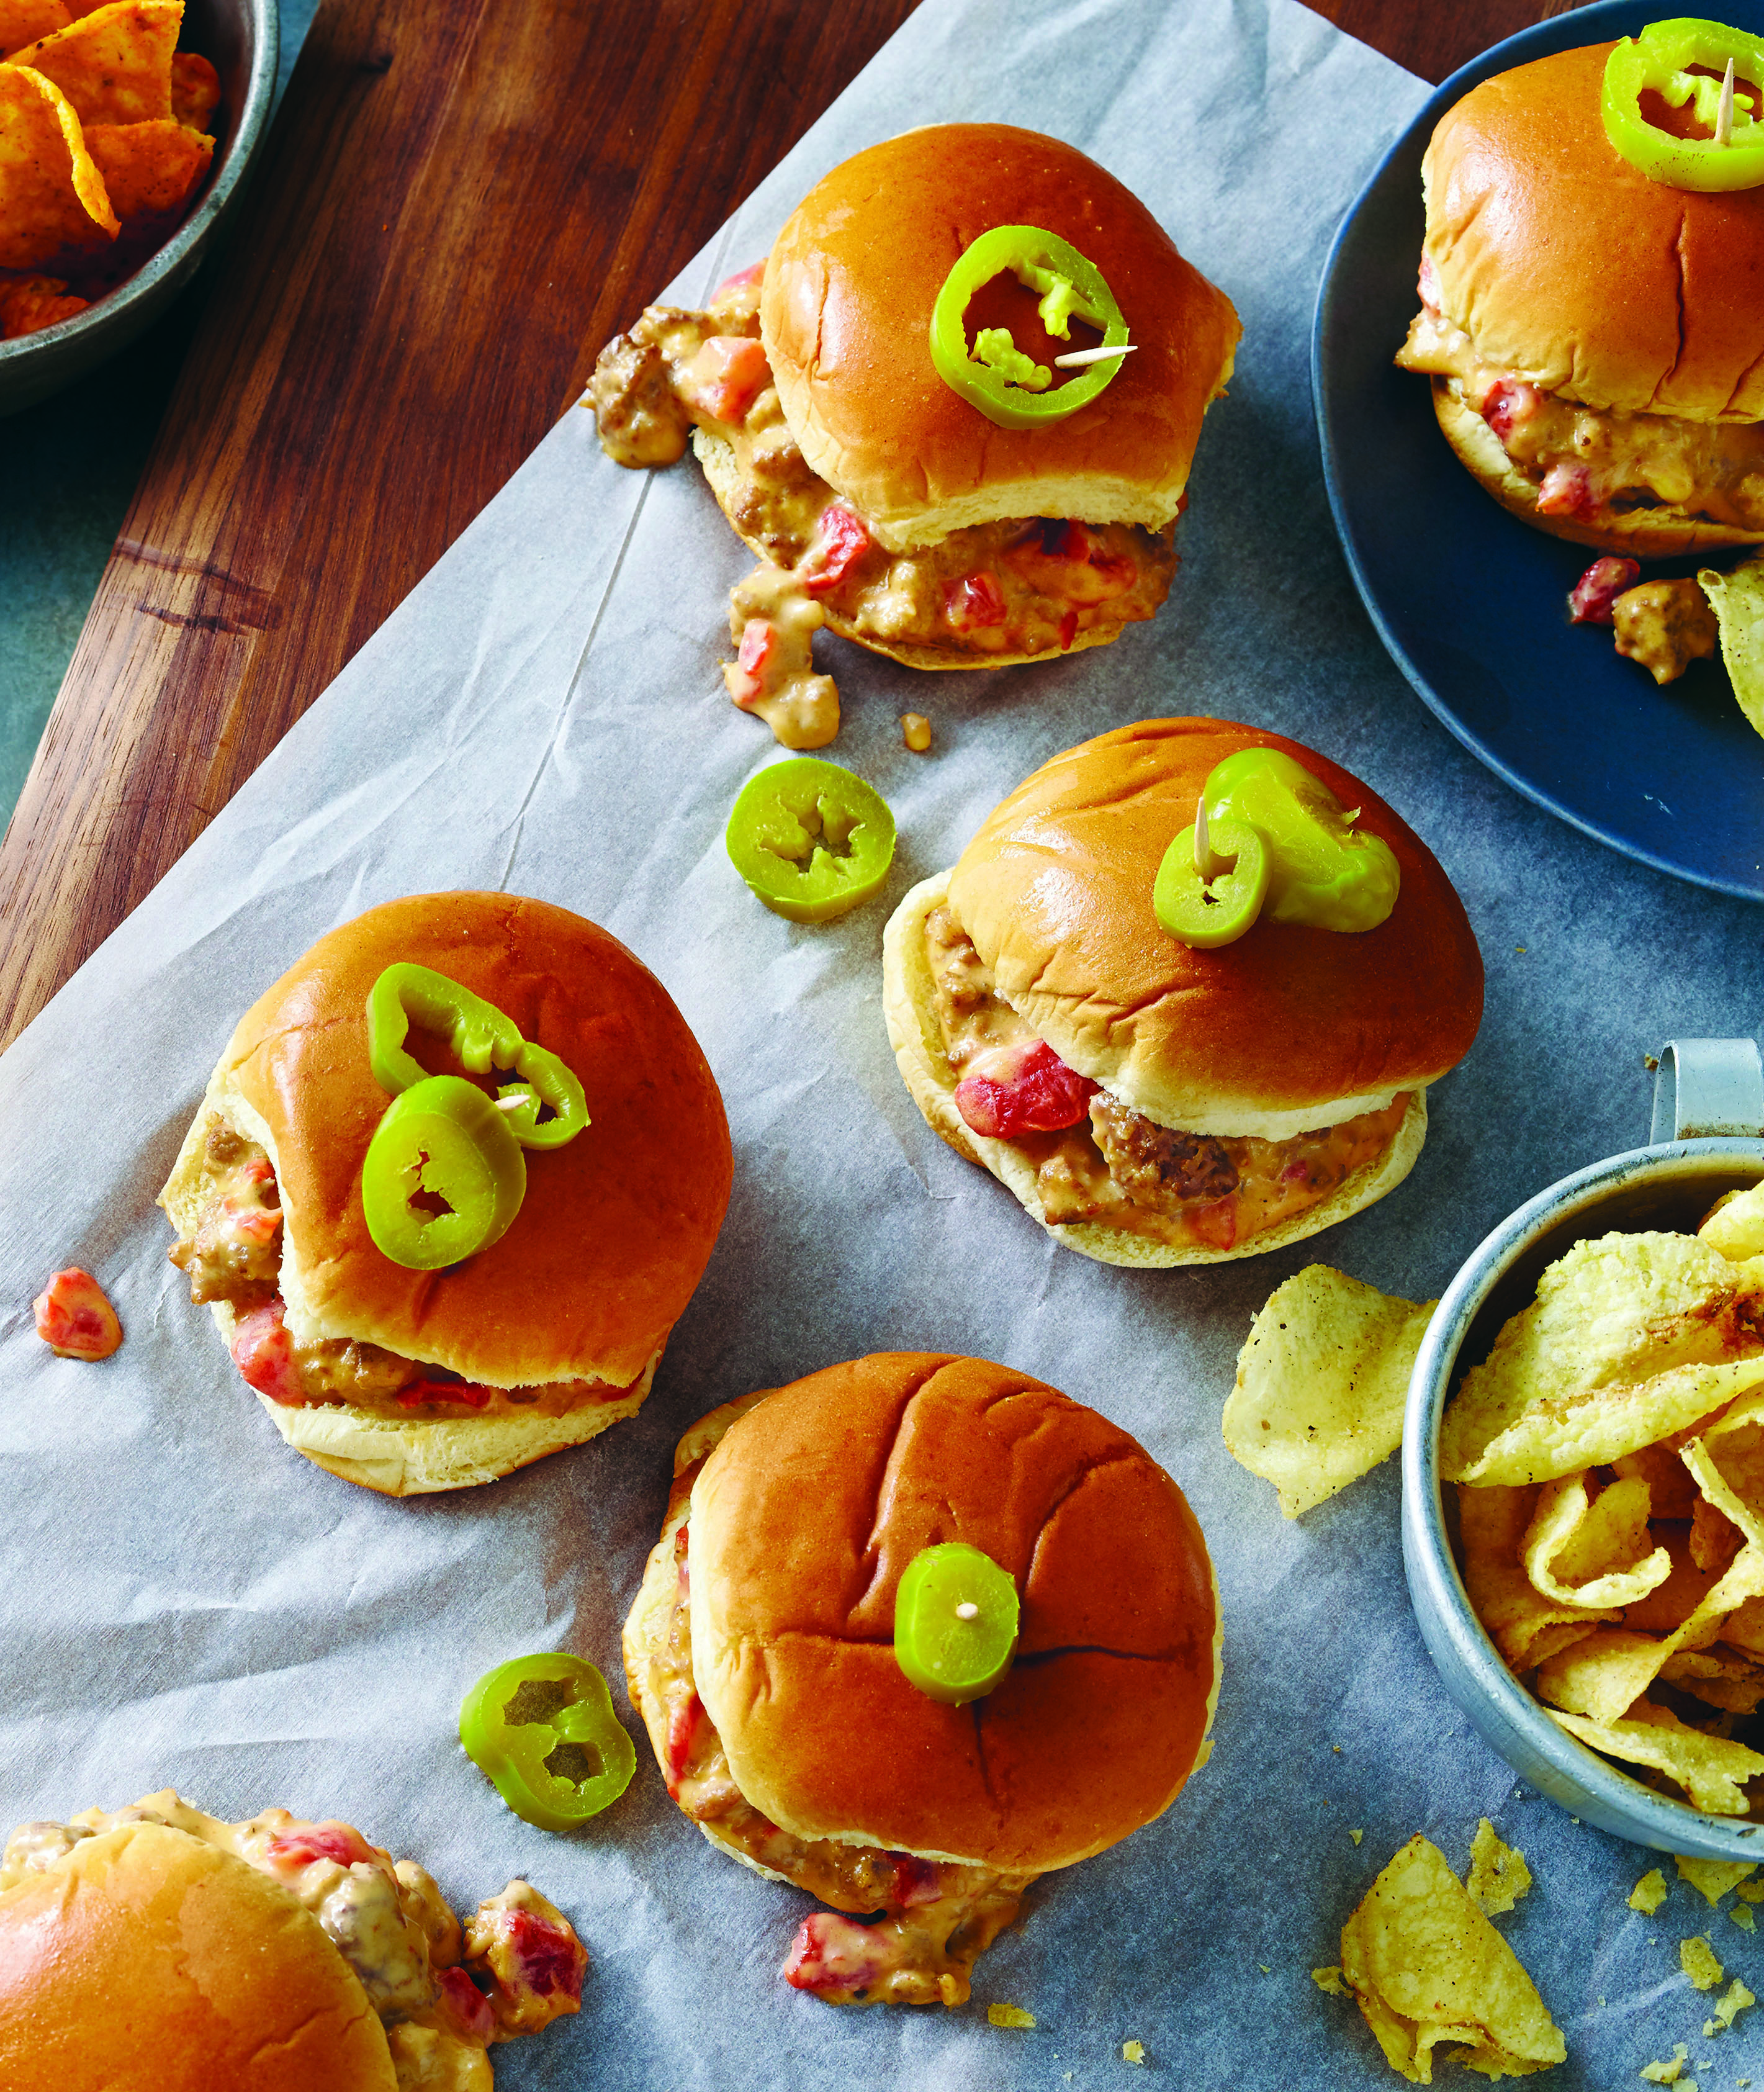 These sliders may seem simple, made with ingredients you probably have stored in your cabinets year-round, but when you take your first bite? You won't stop.